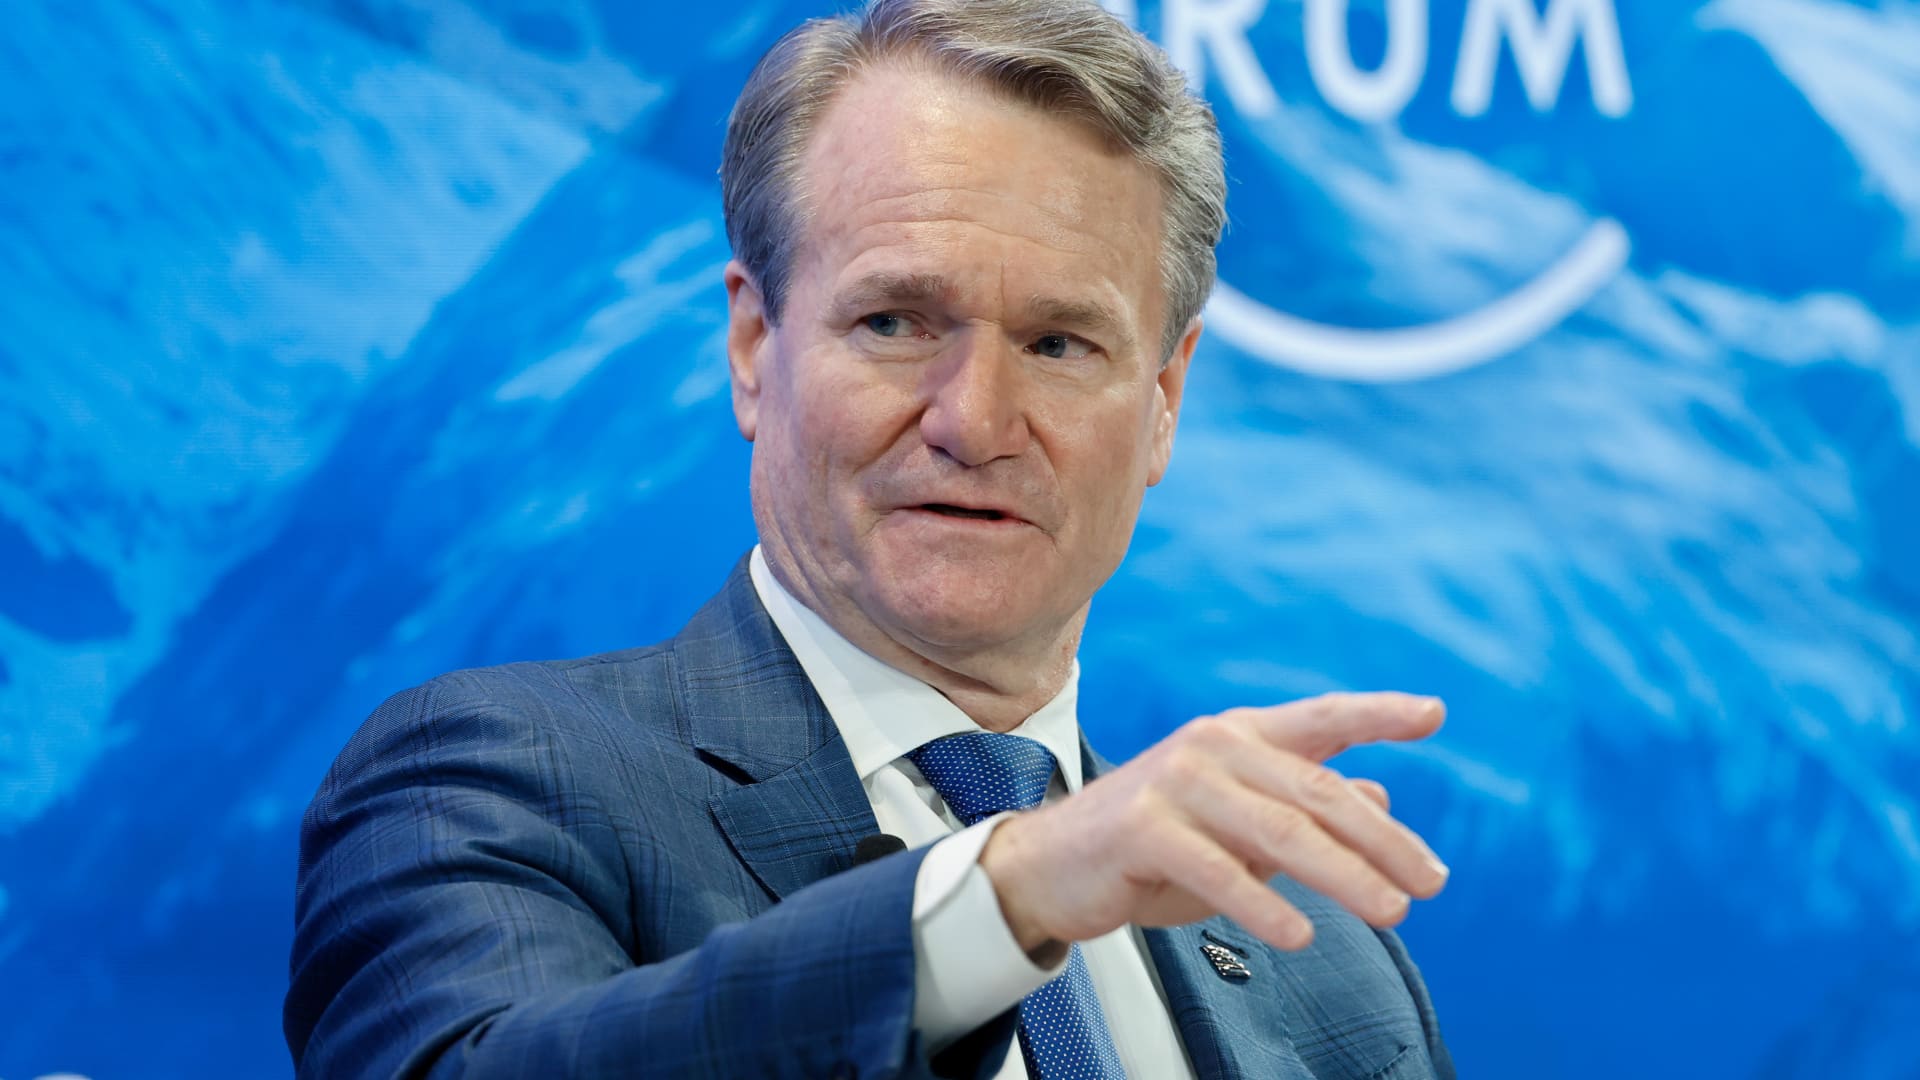 Bank of America CEO Brian Moynihan says he sees a relatively mild recession